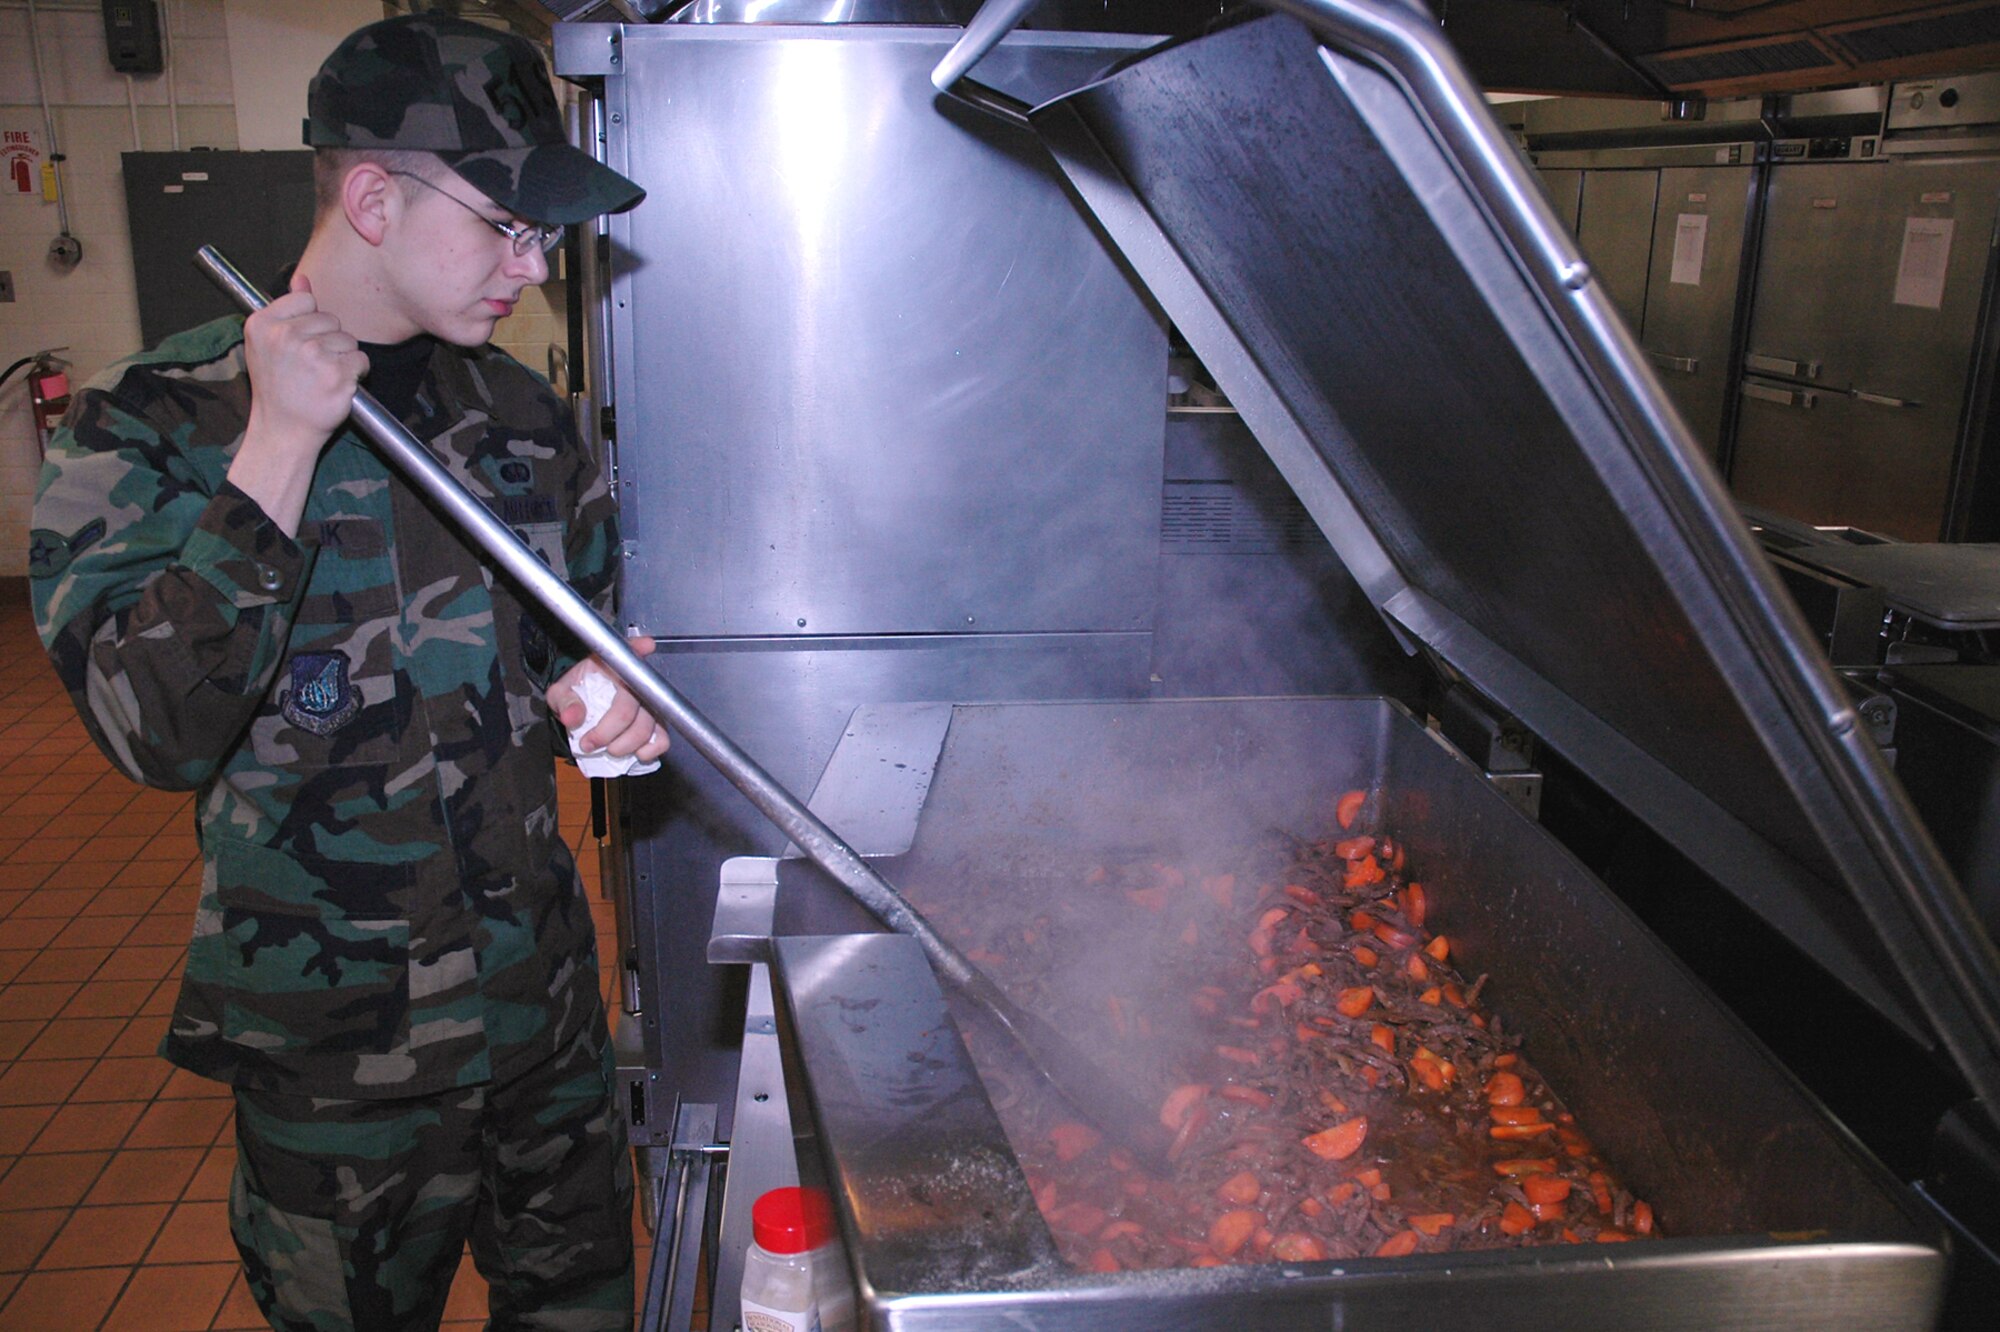 OSAN AIR BASE, Republic of Korea --  Airman Jason Relik, 51st Services Squadron, prepares paprika beef for dinner Tuesday. Airman Relik is a food service apprentice at the Pacific House Dining Facility here. (U.S. Air Force photo by Staff Sgt. Benjamin Rojek)